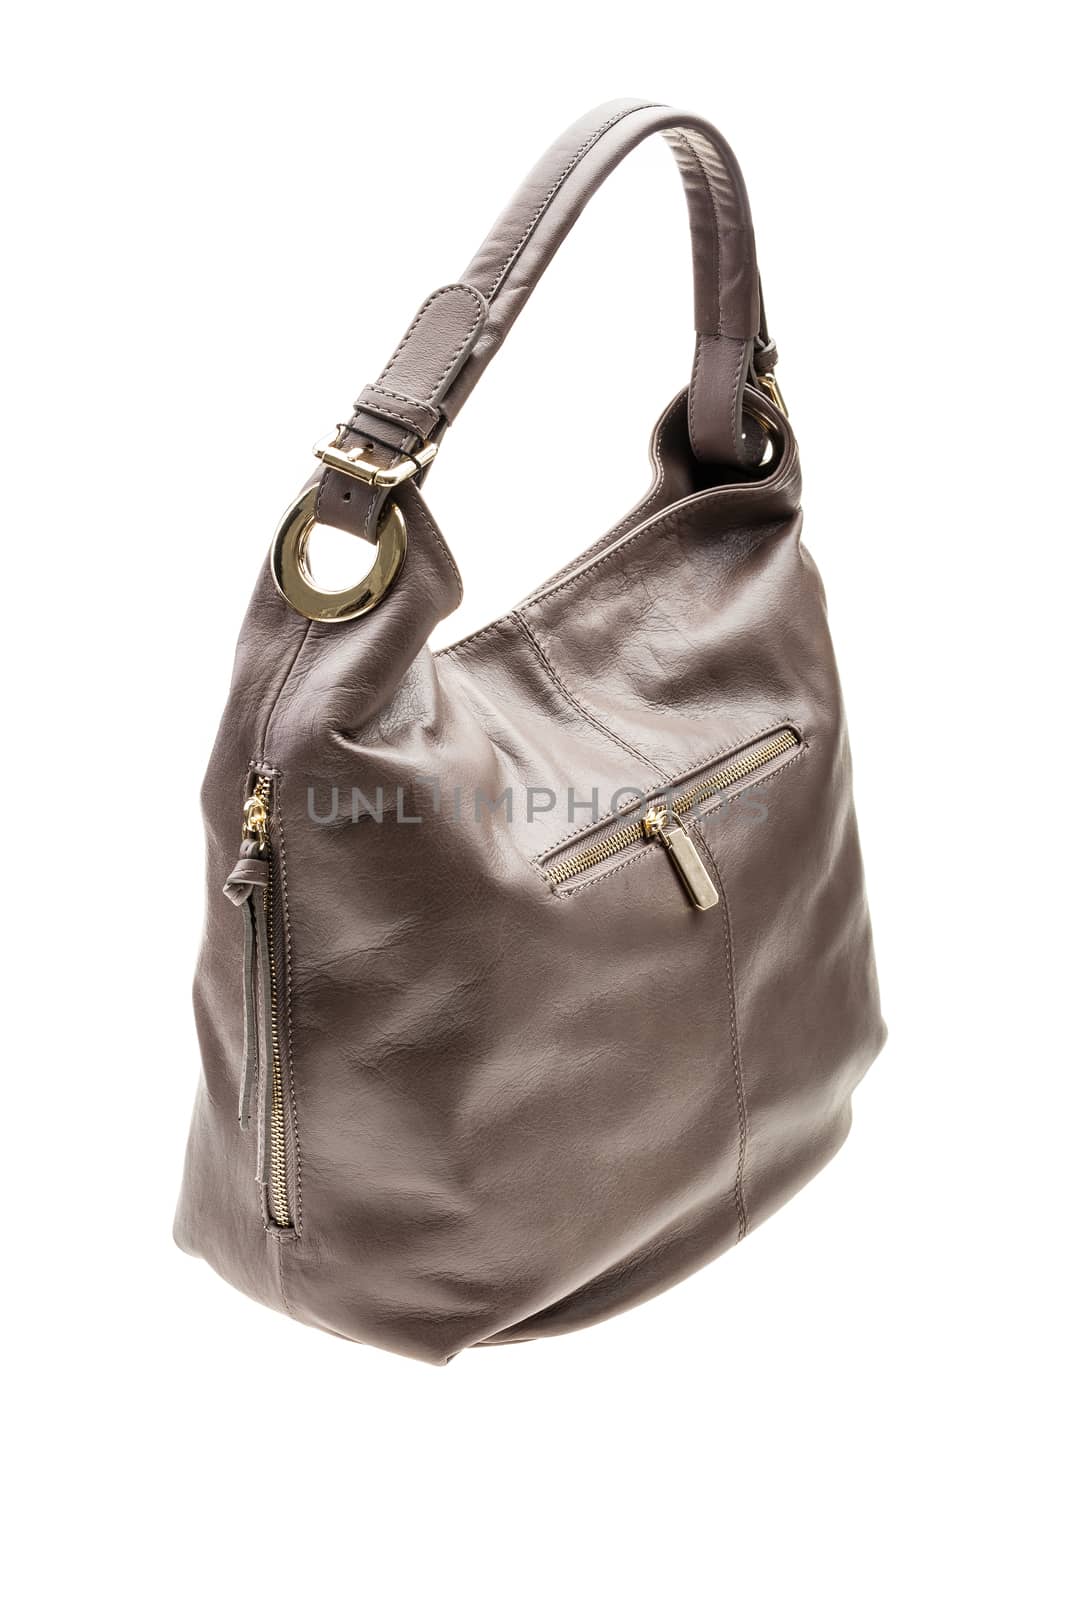 Brown womens bag isolated on white background. by igor_stramyk